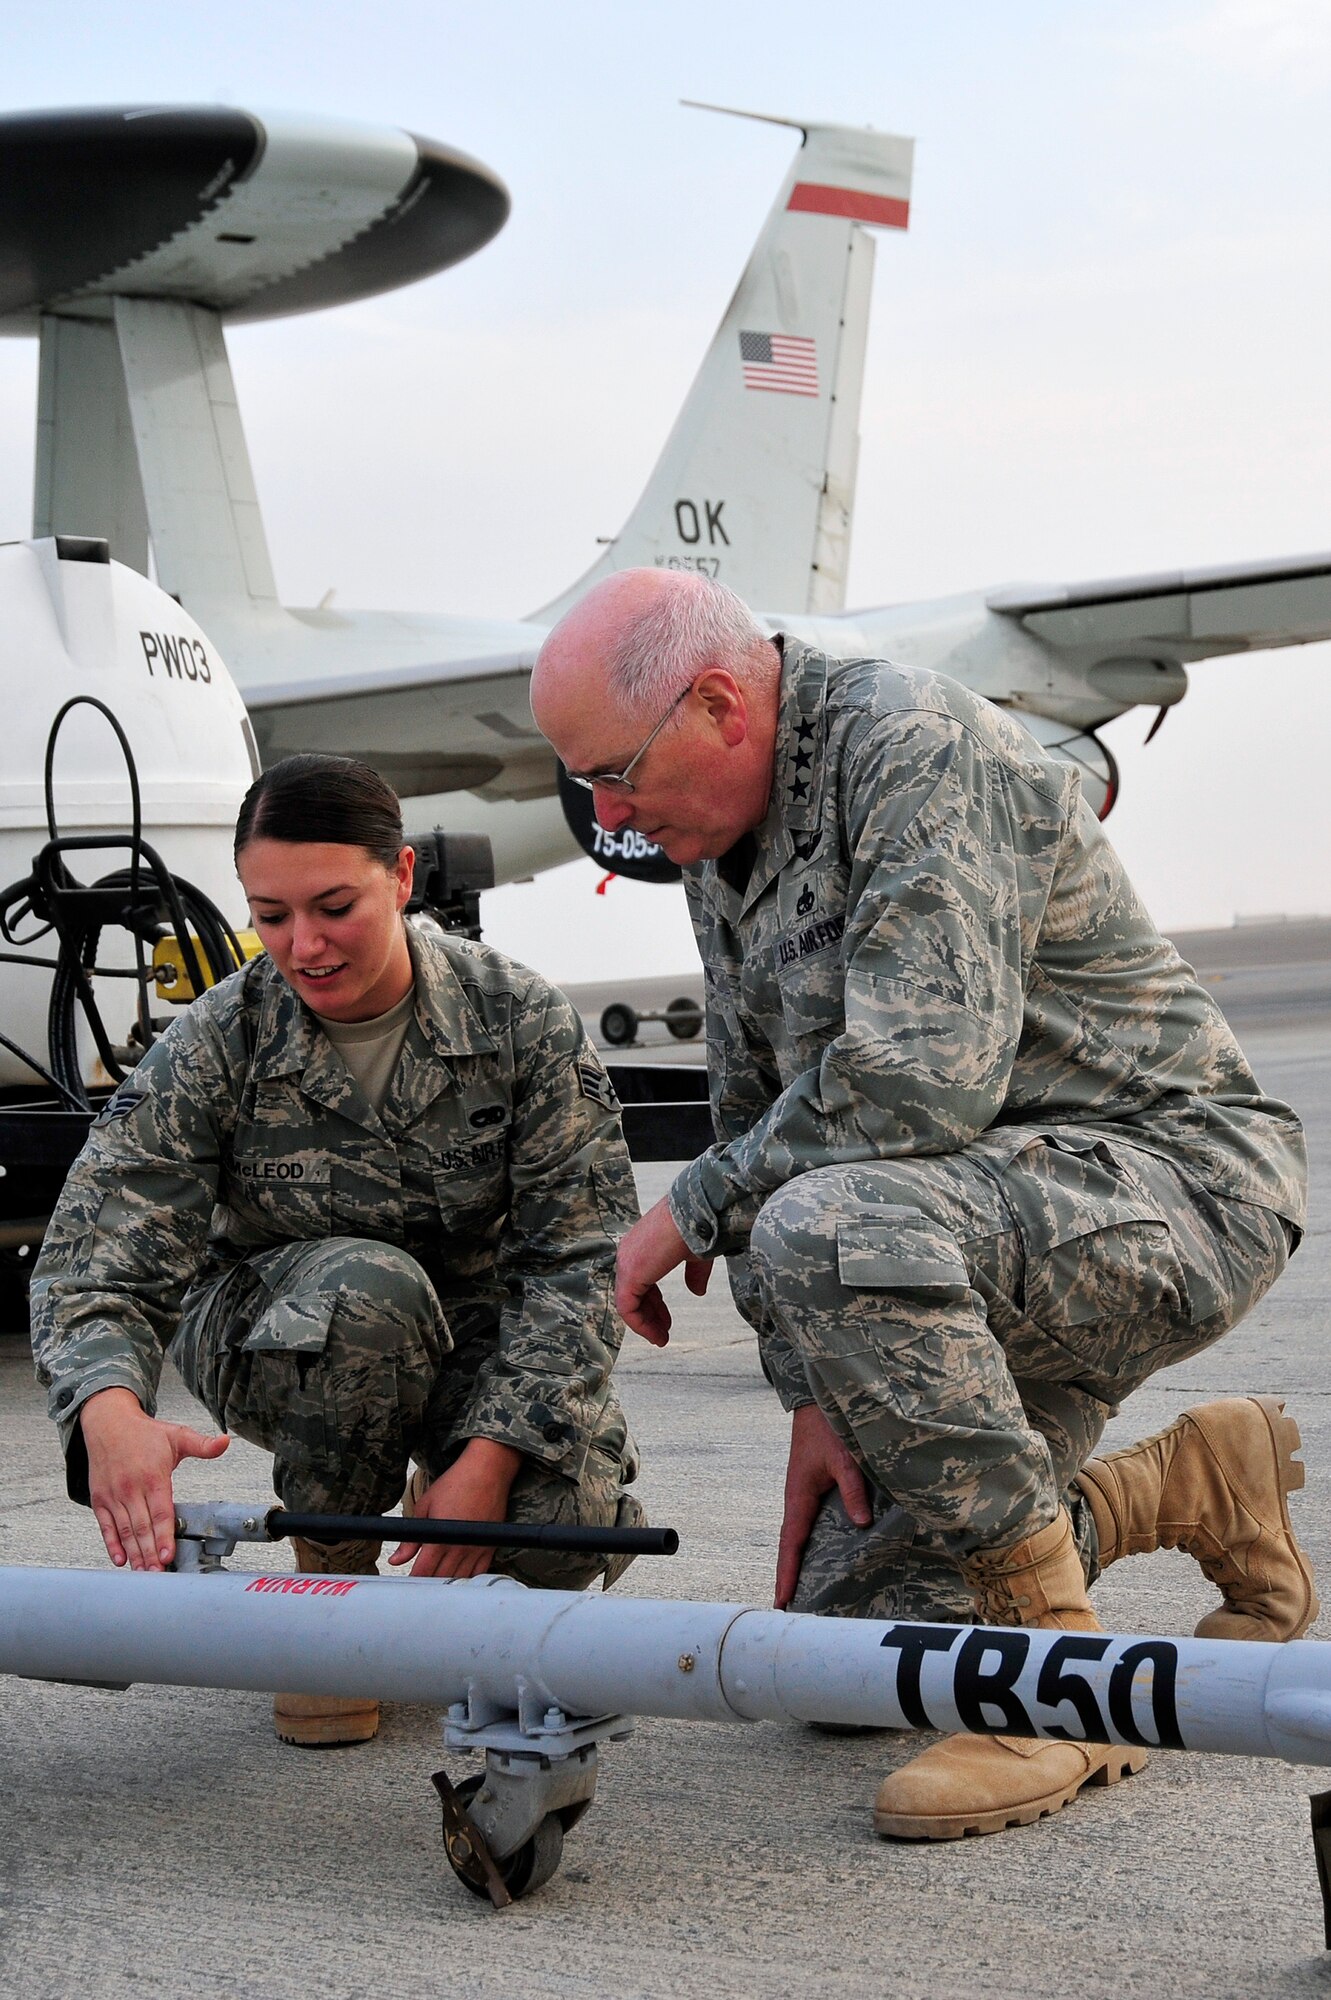 SOUTHWEST ASIA - Lt. Gen. Loren Reno, Deputy Chief of Staff for Logistics, Installations and Mission Support, listens to a brief from Senior Airman Shalane McLeod, 380th Expeditionary Maintenance Squadron aircraft ground equipment, on the operation of an aircraft tow-bar Dec. 10, 2009. Airman McLeod is deployed from Luke Air Force Base, Ariz., and grew up in Chicago, Ill. (U.S. Air Force photo/Tech. Sgt. Charles Larkin Sr)